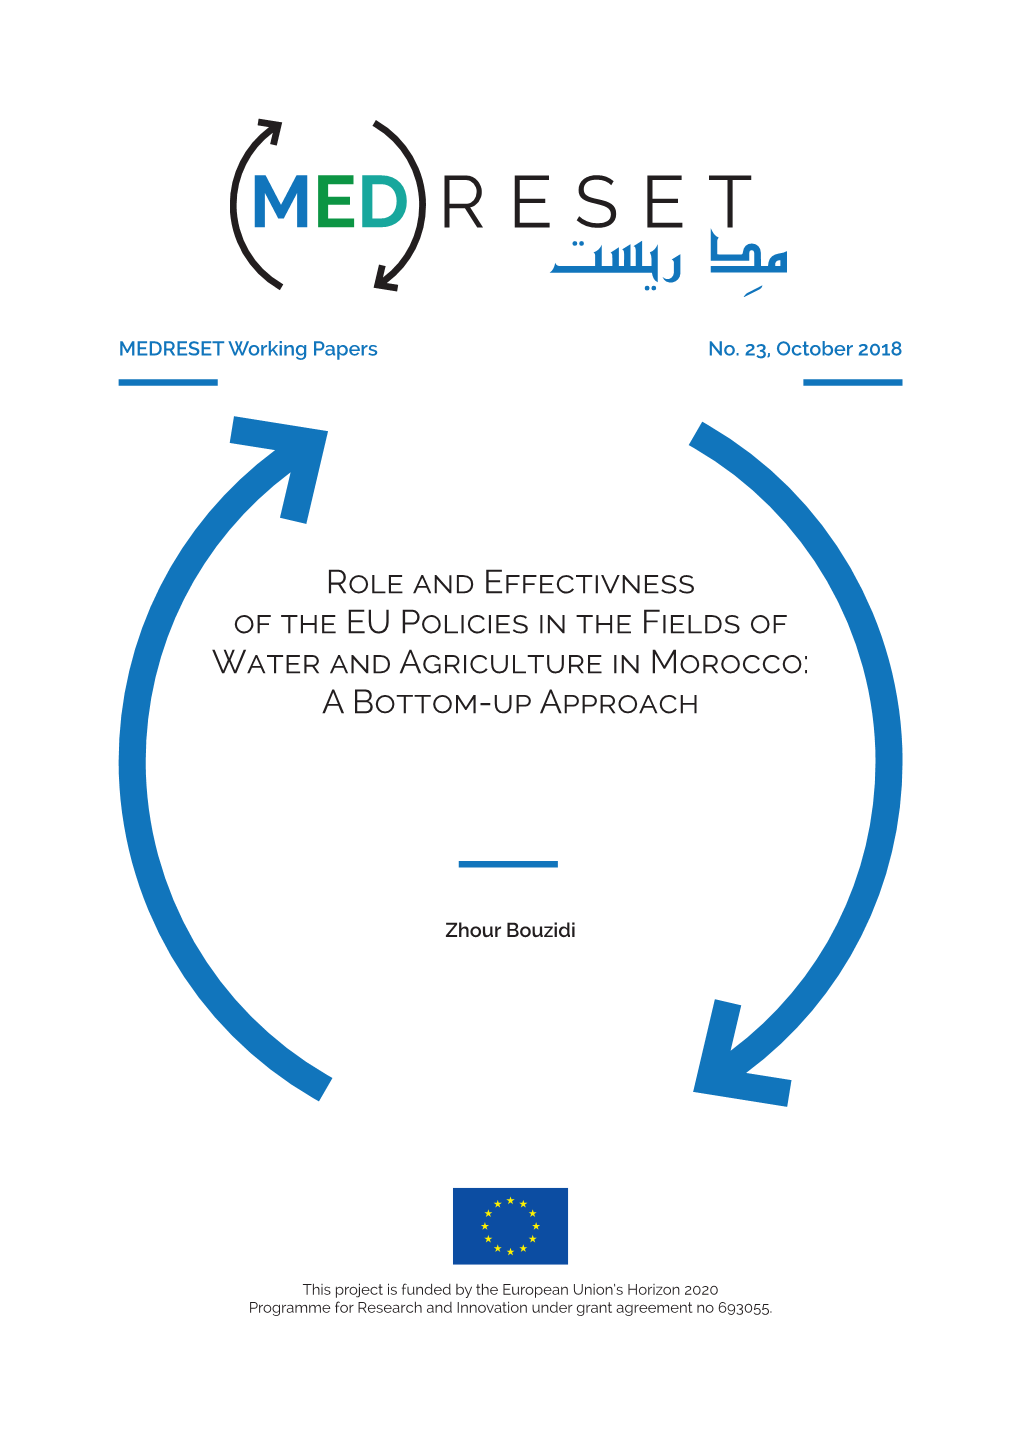 Role and Effectivness of the EU Policies in the Fields of Water and Agriculture in Morocco: a Bottom-Up Approach